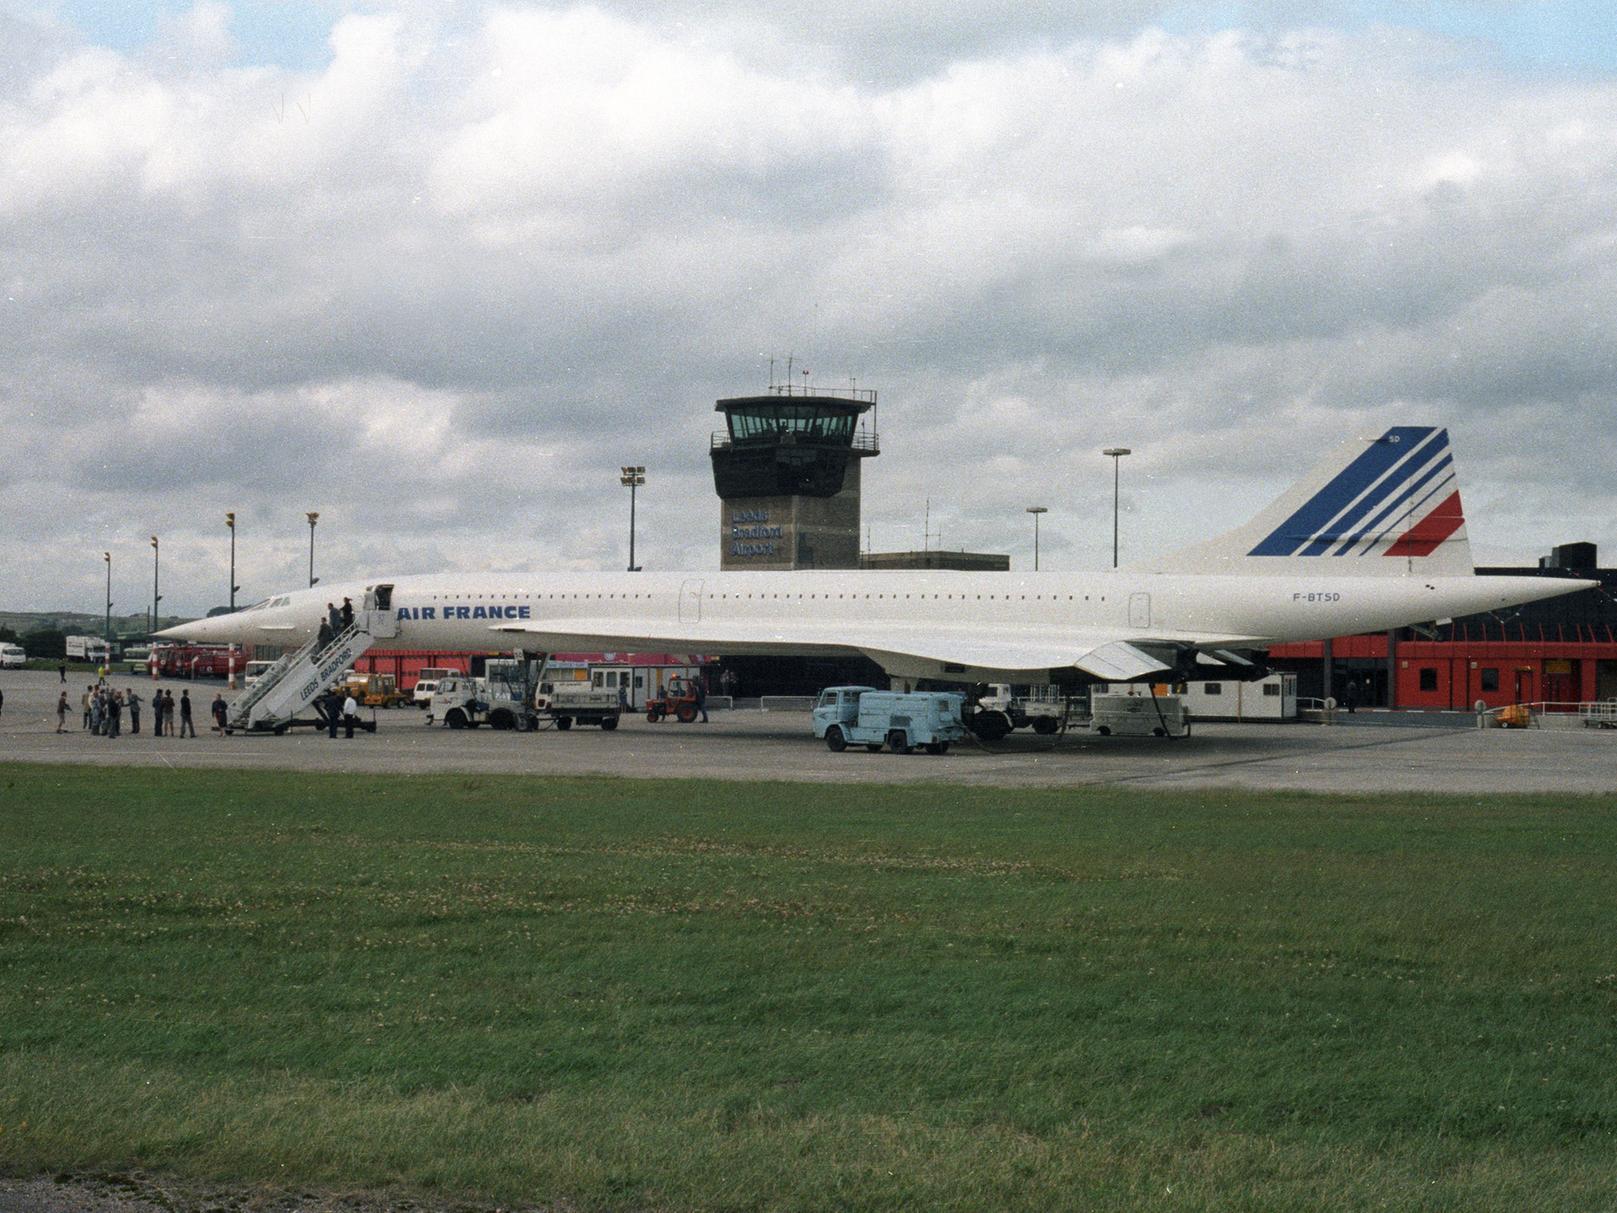 Do you remember Concorde at LBA on its first ever visit?